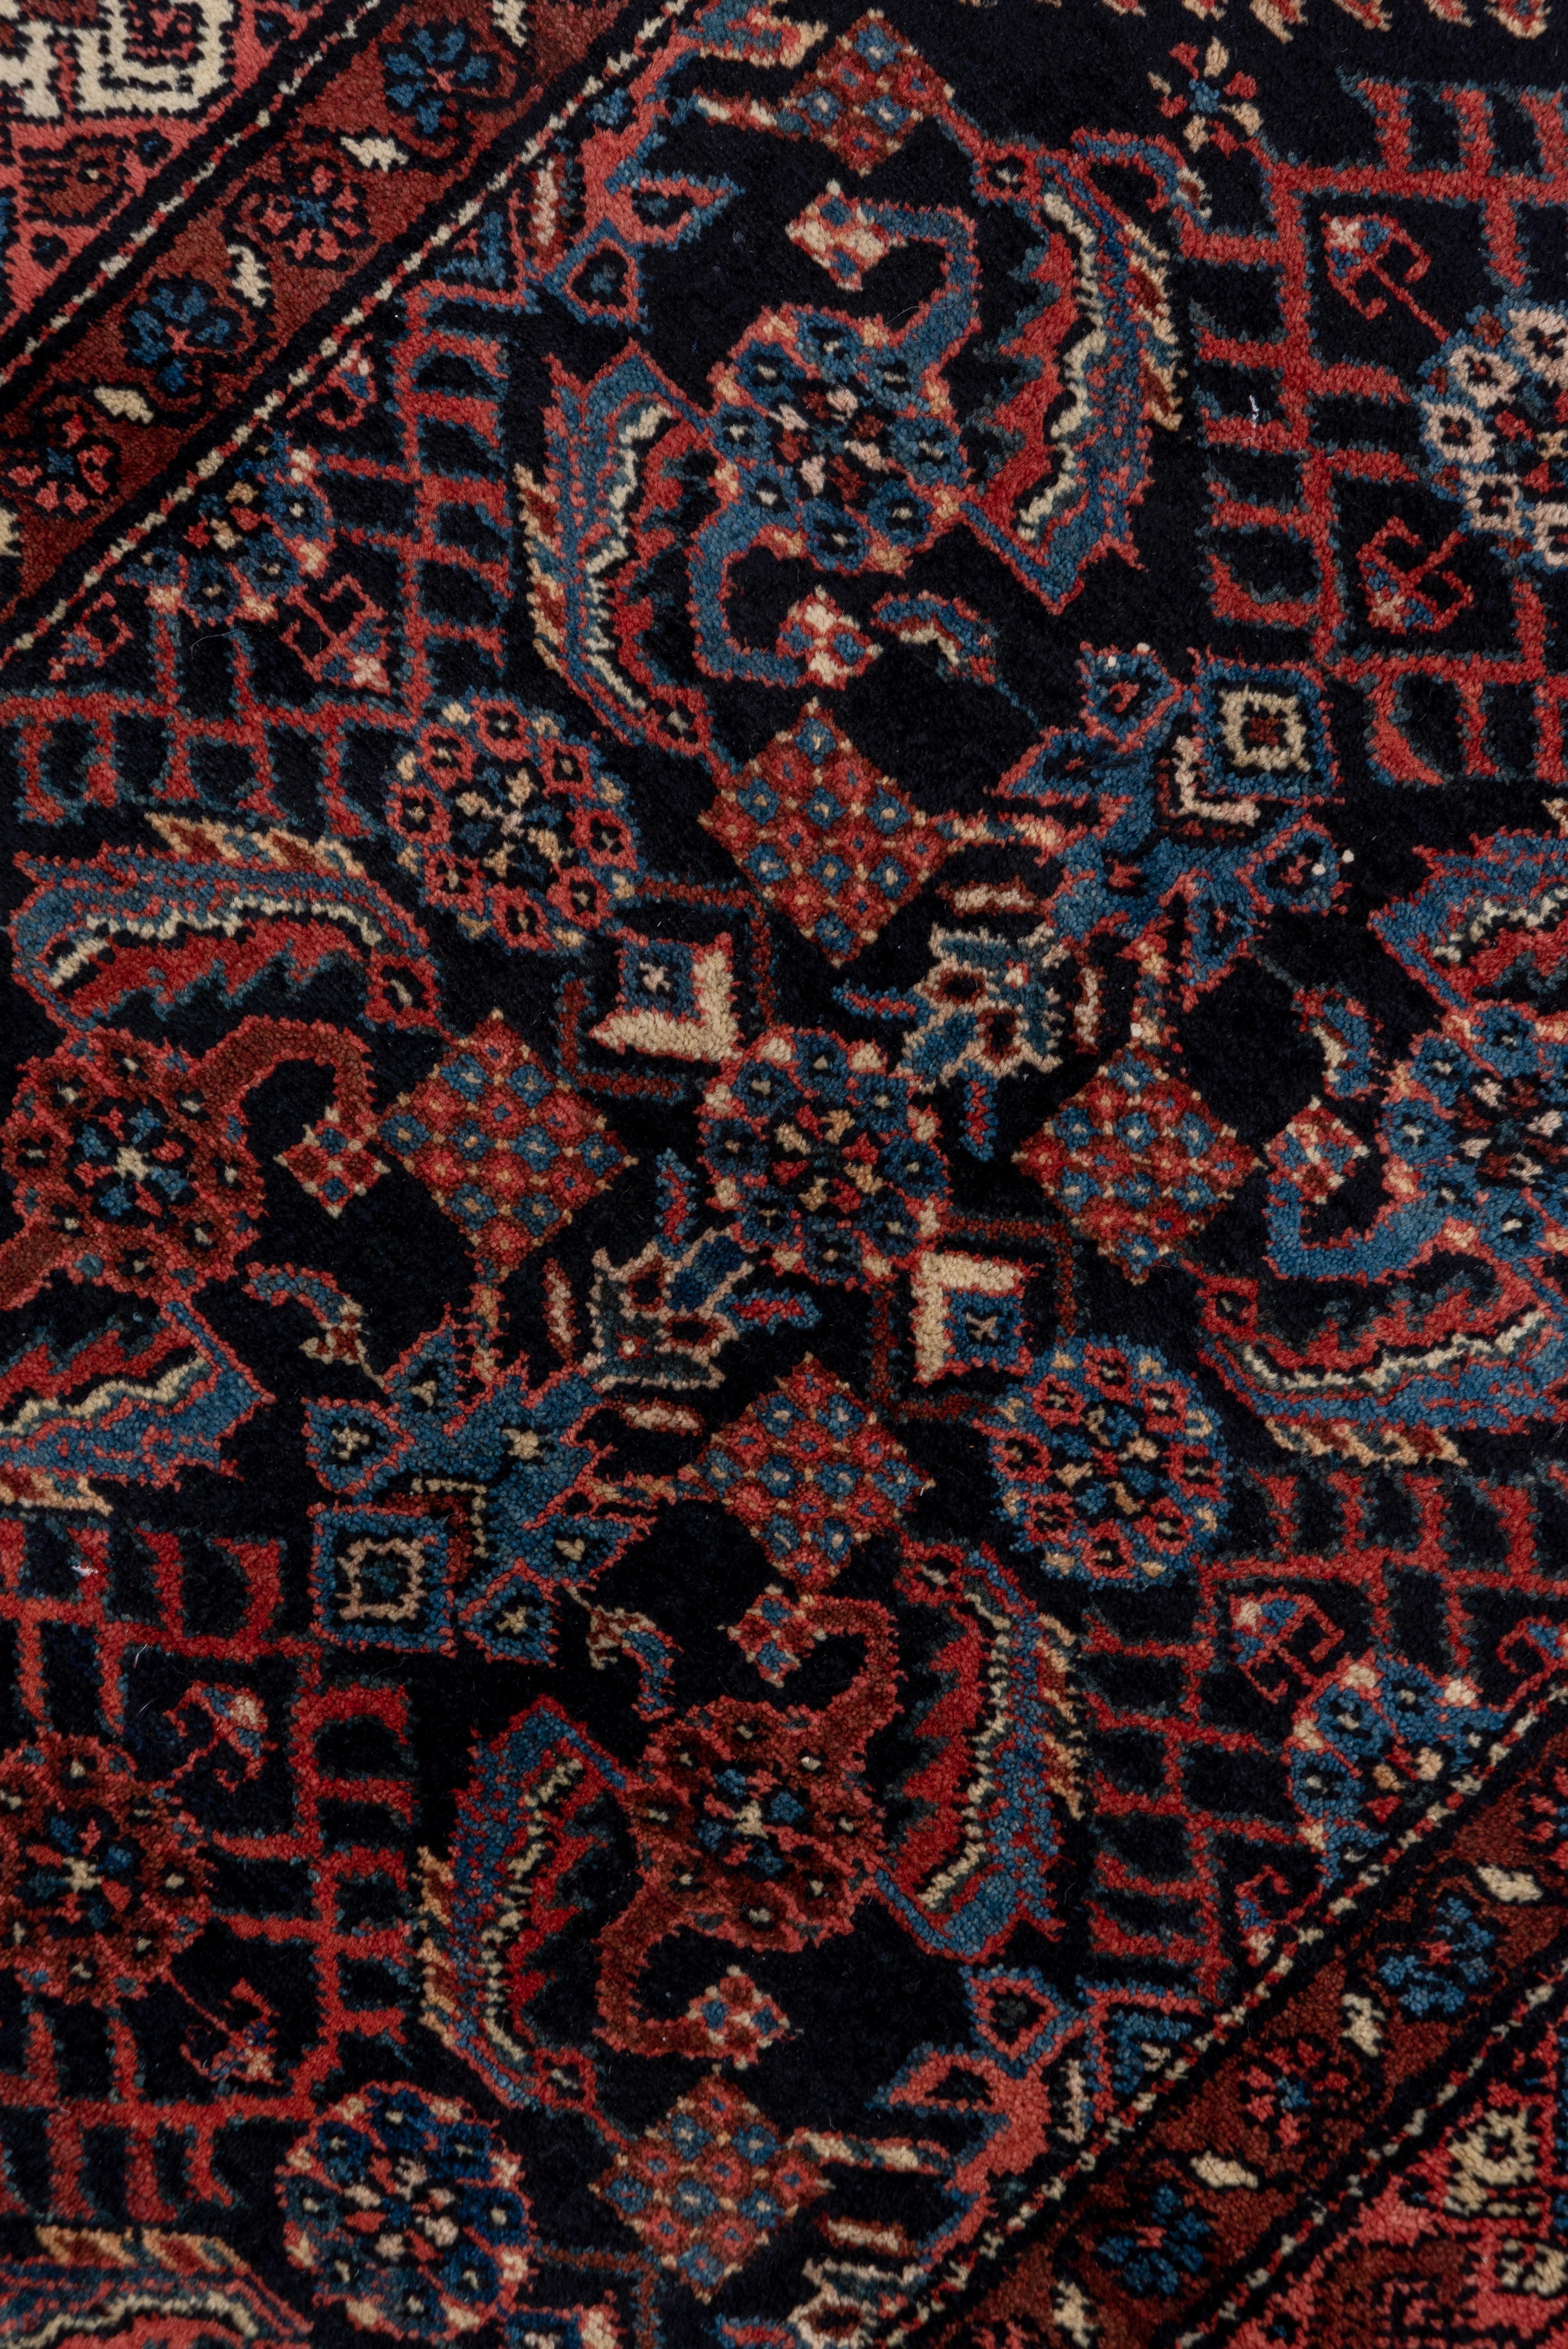 This moderately woven, cotton foundation West Persian rural runner shows a navy ground filled with an extensive all-over Herati design accented in denim blue, coral and ivory. Hook-fringed open central diamonds. Striped triangular corners and